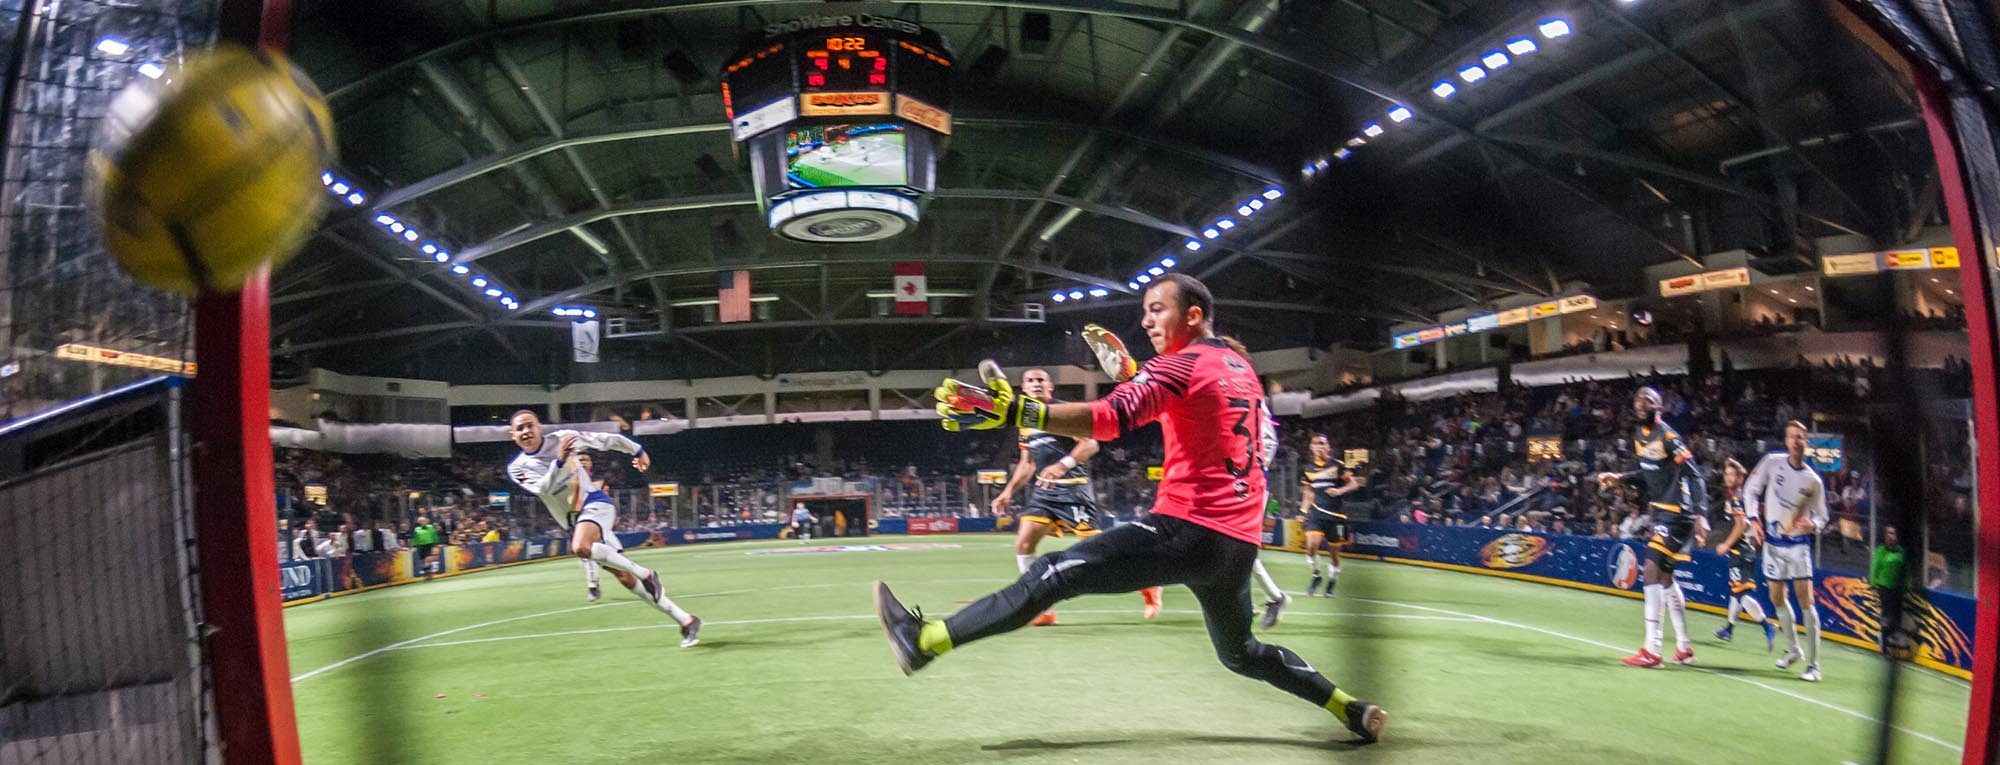 Tacoma Stars game at the accesso ShoWare Center in Kent, Washington